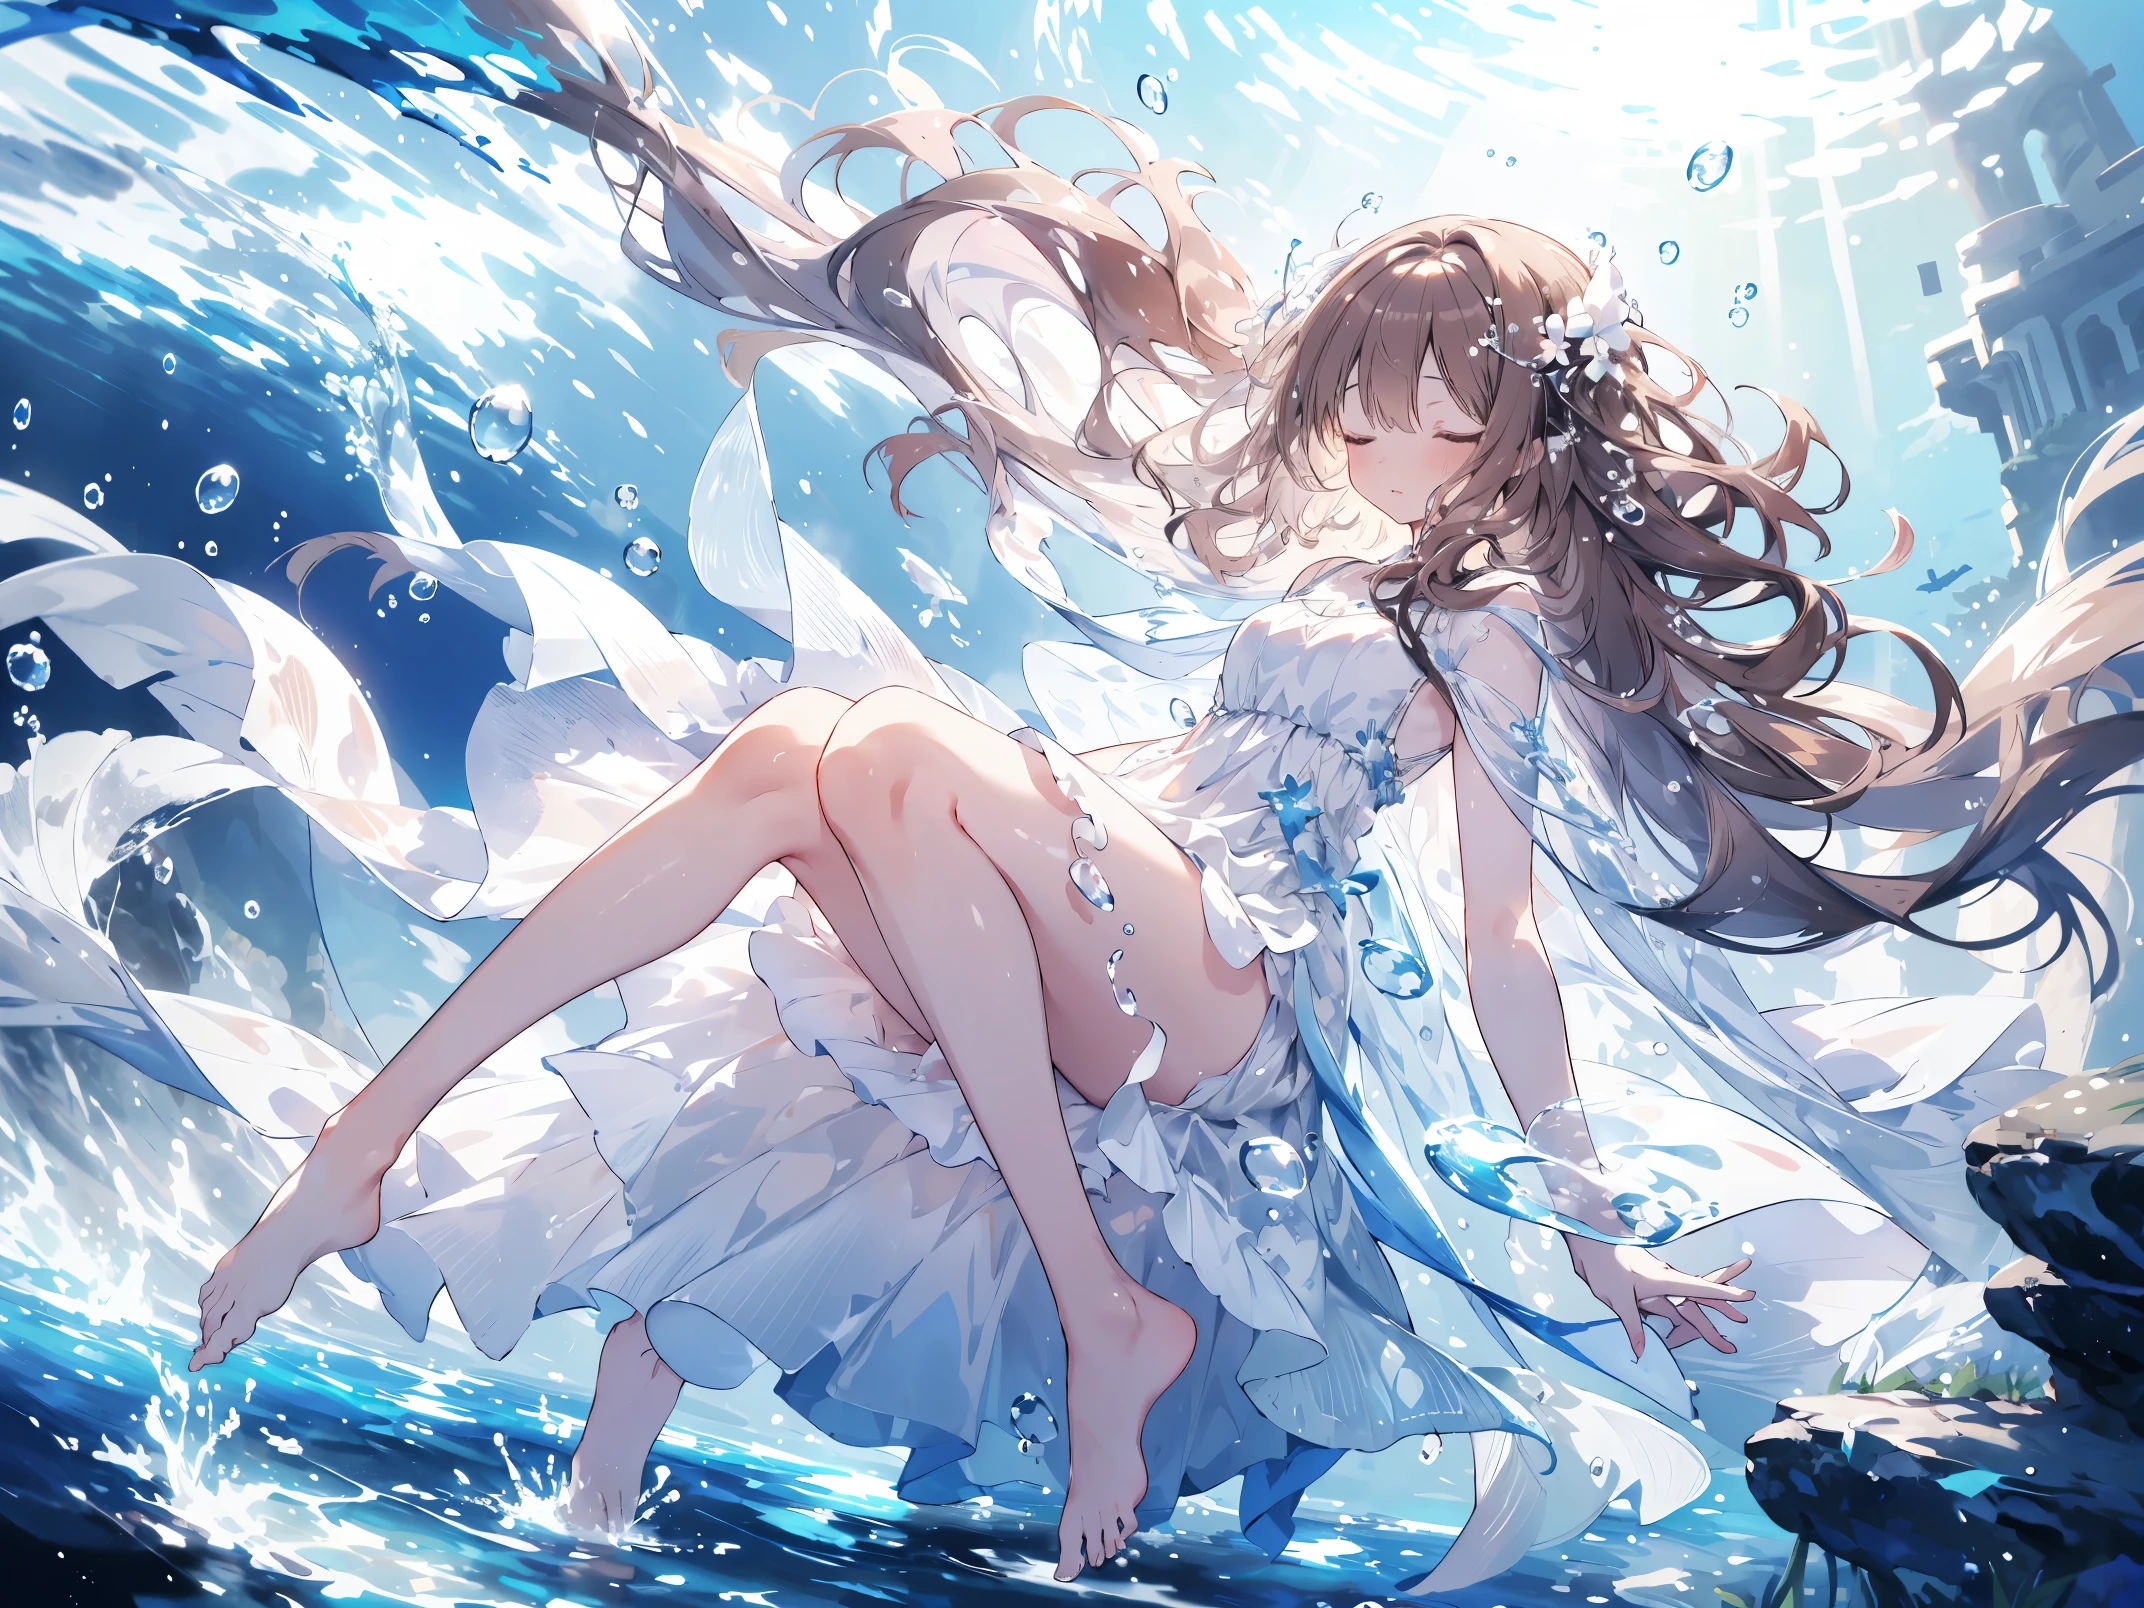 Sleep, an artwork of a woman in white dress and flowing white hair under water, 1 girl, dress, in water, alone, long hair, close your eyes, brown hair, air bubble, barefoot, bubble